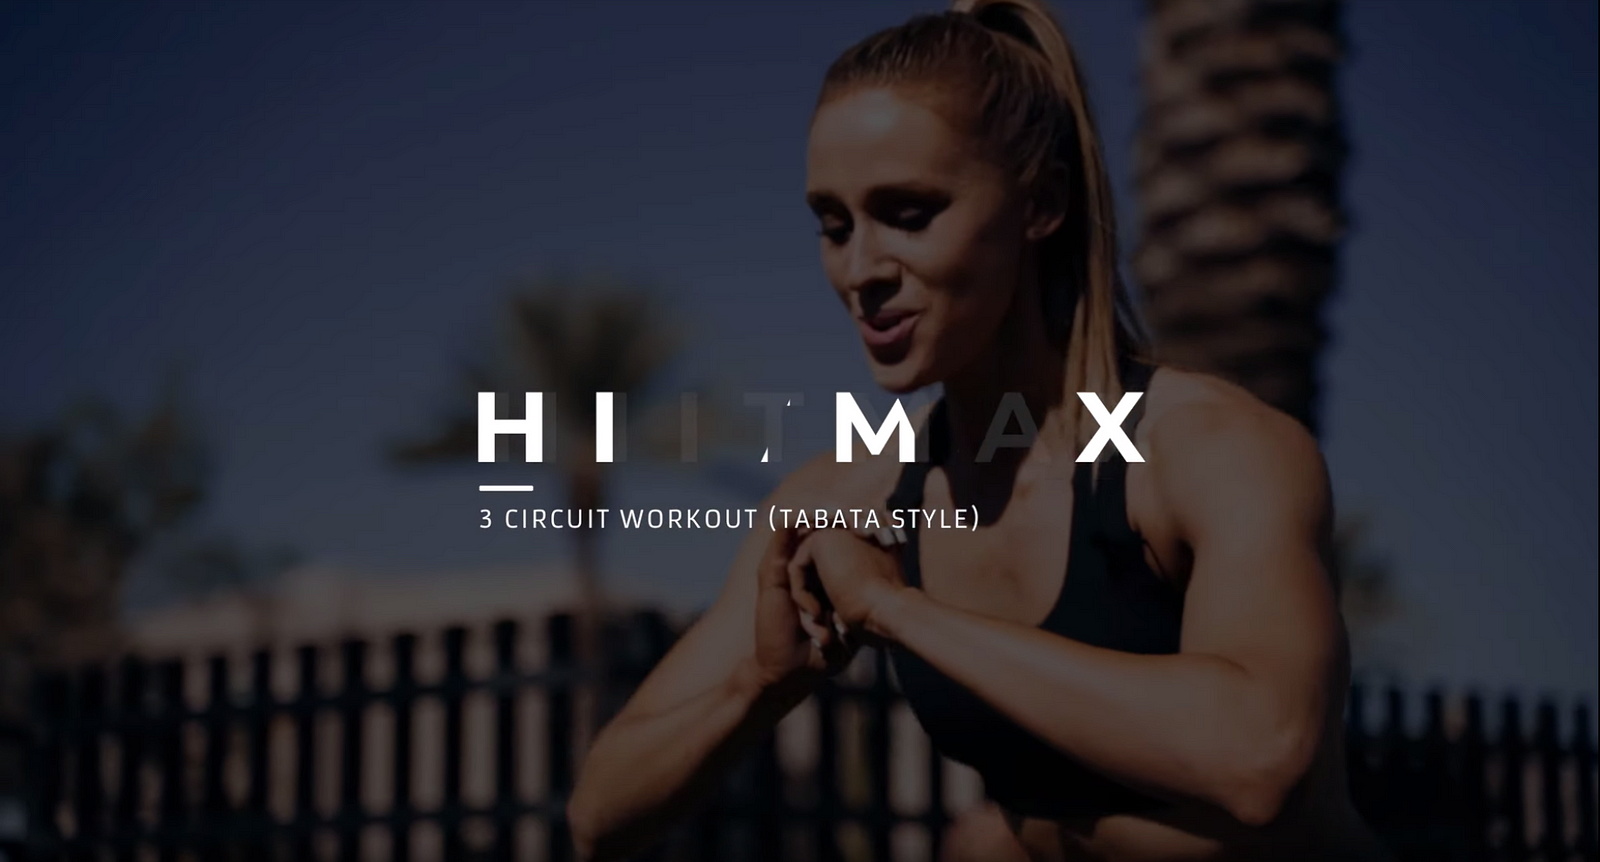 7 Minute Cardio Hiit Workout For Fat Loss Group Home